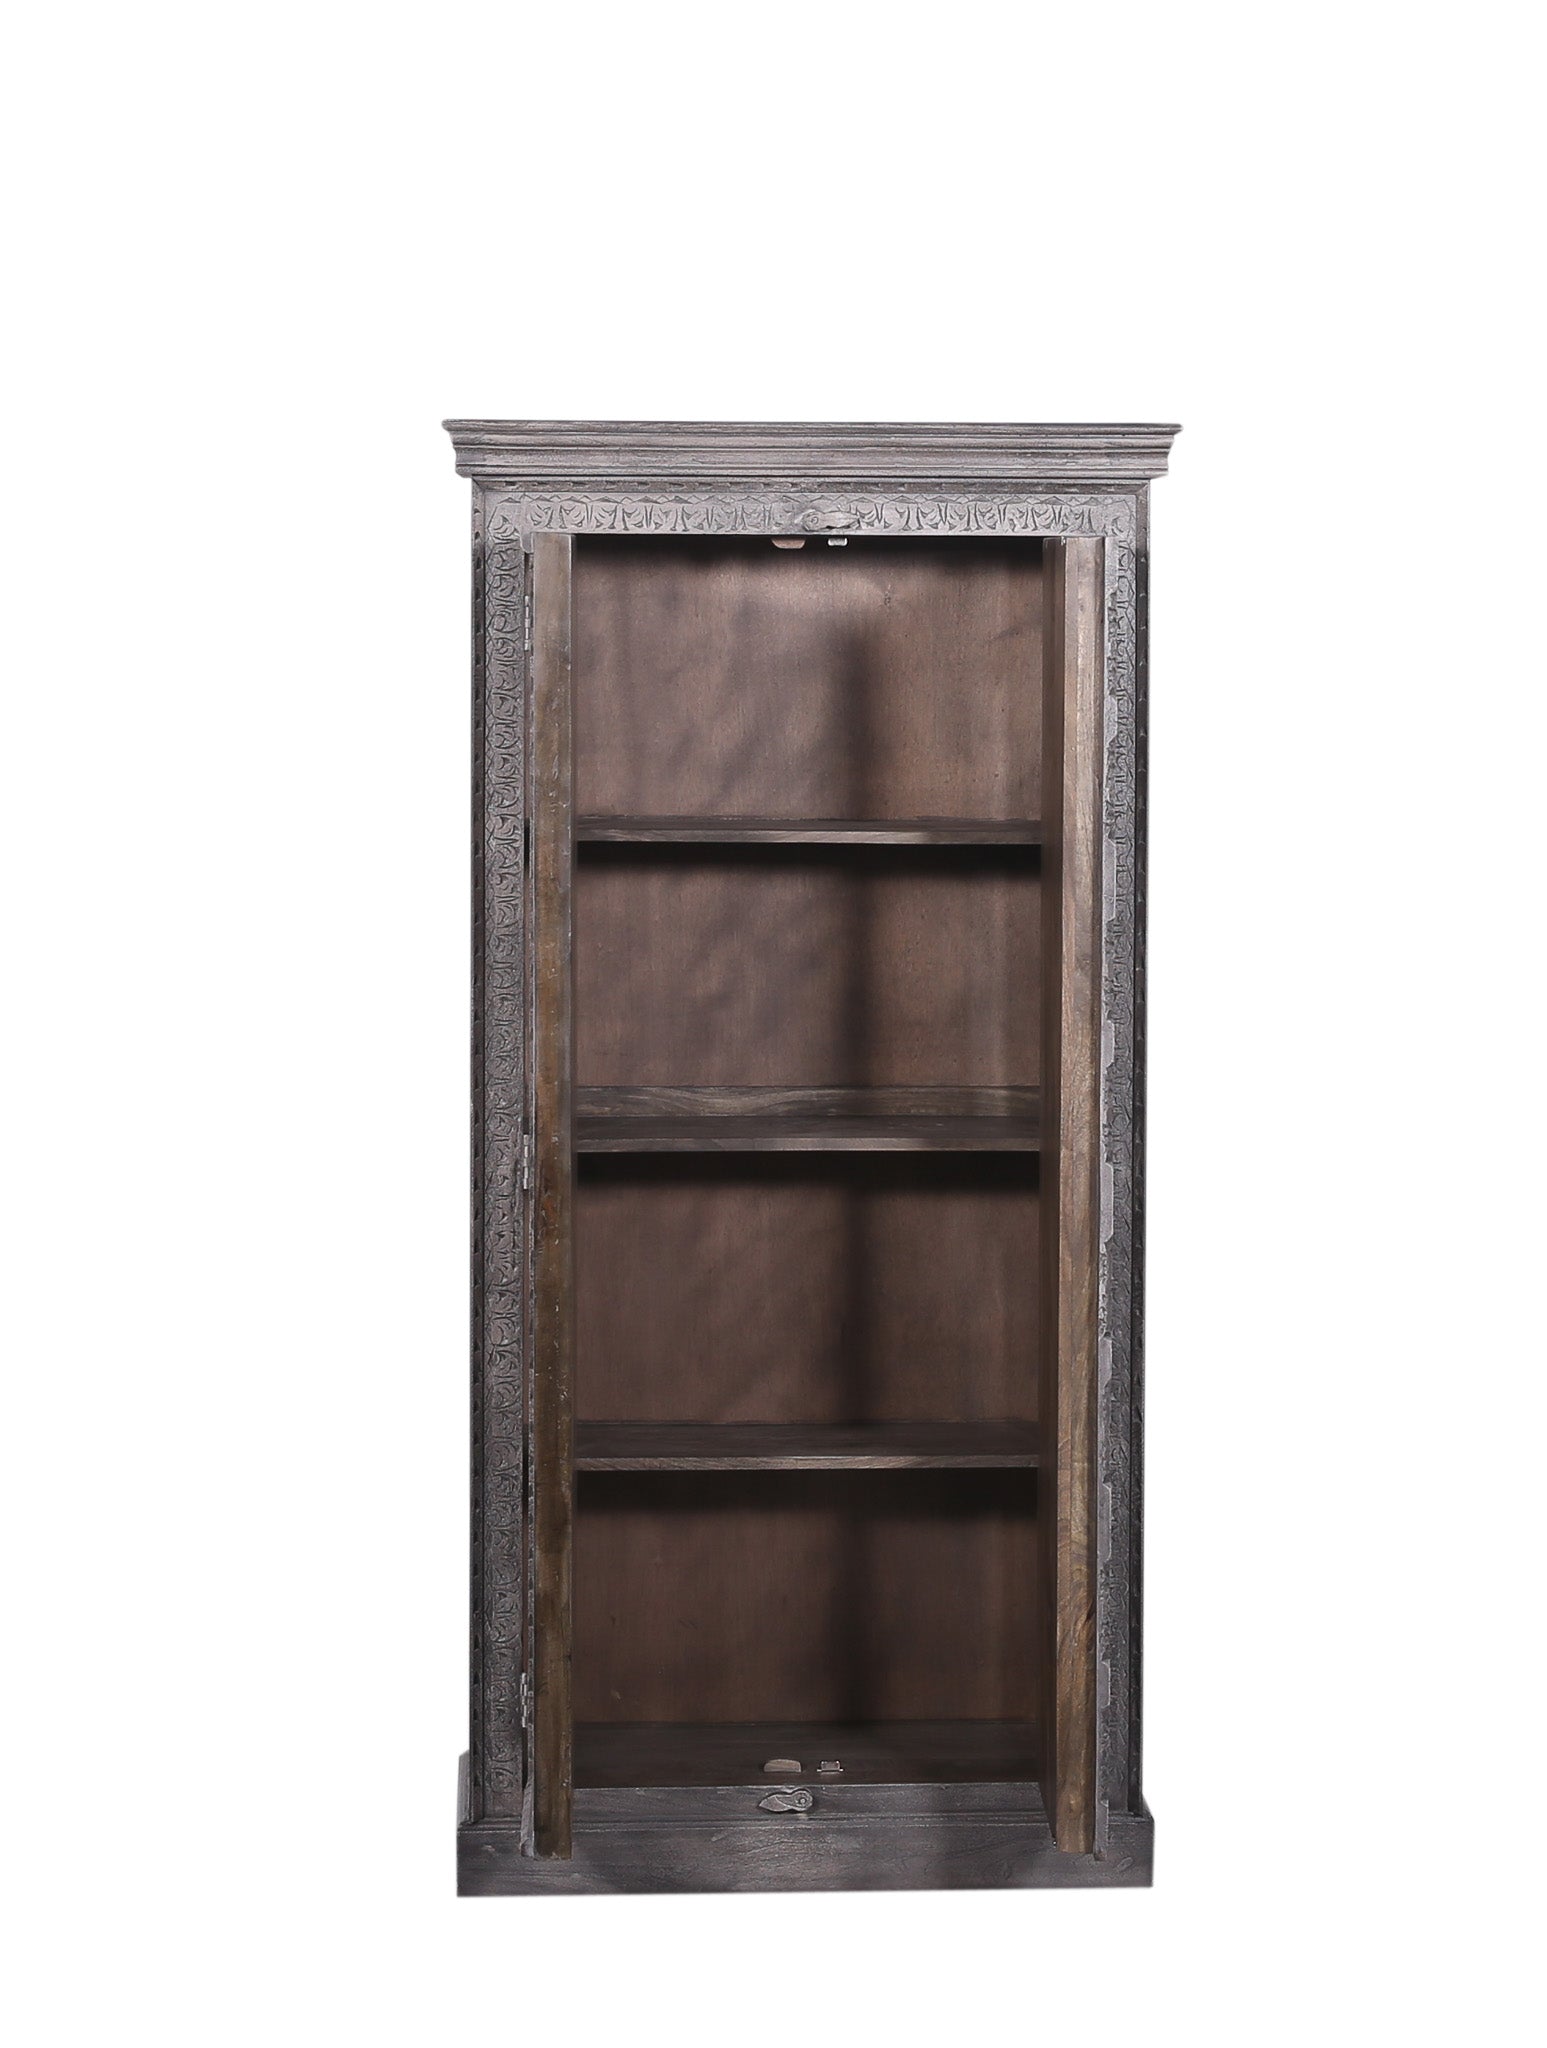 Mahala Nomad Wooden Cabinet in Distressed Grey Finish in Cabinets by VMInnovations